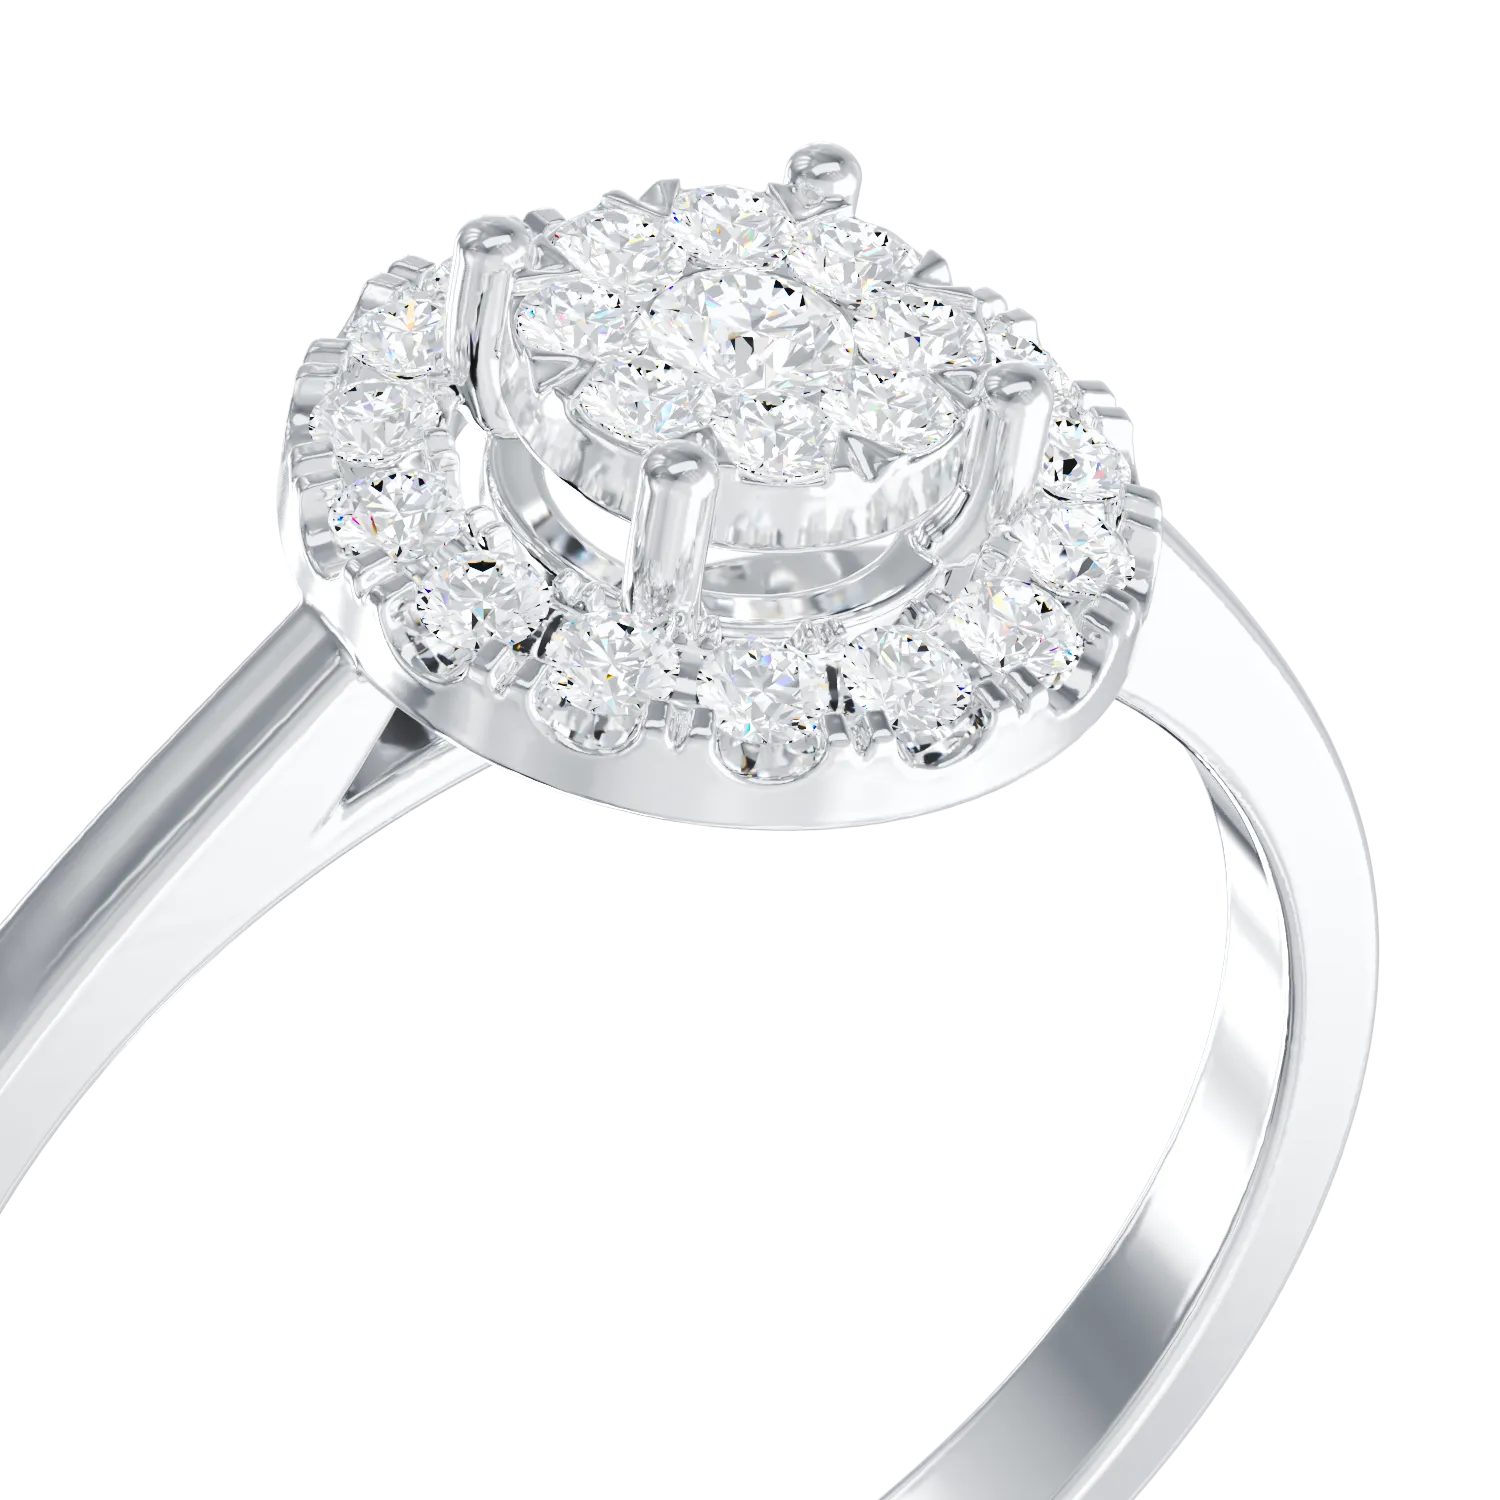 18K white gold engagement ring with 0.14ct diamonds